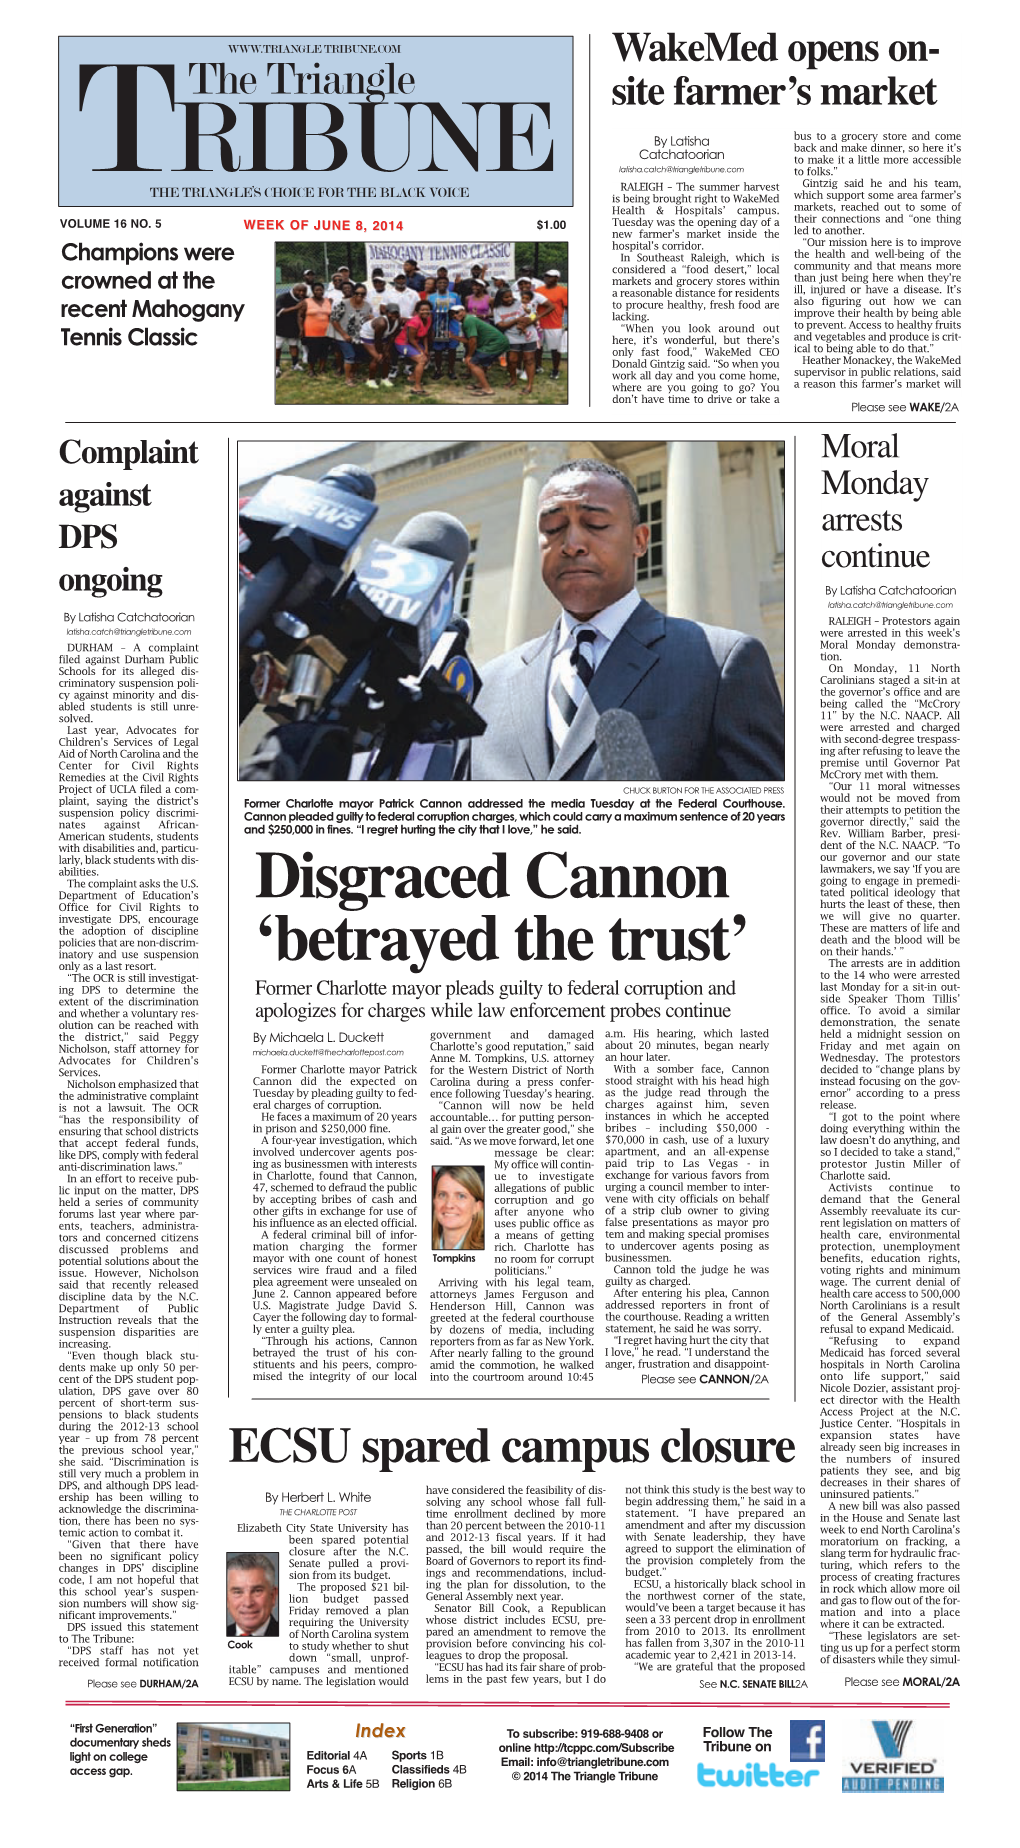 Disgraced Cannon 'Betrayed the Trust'